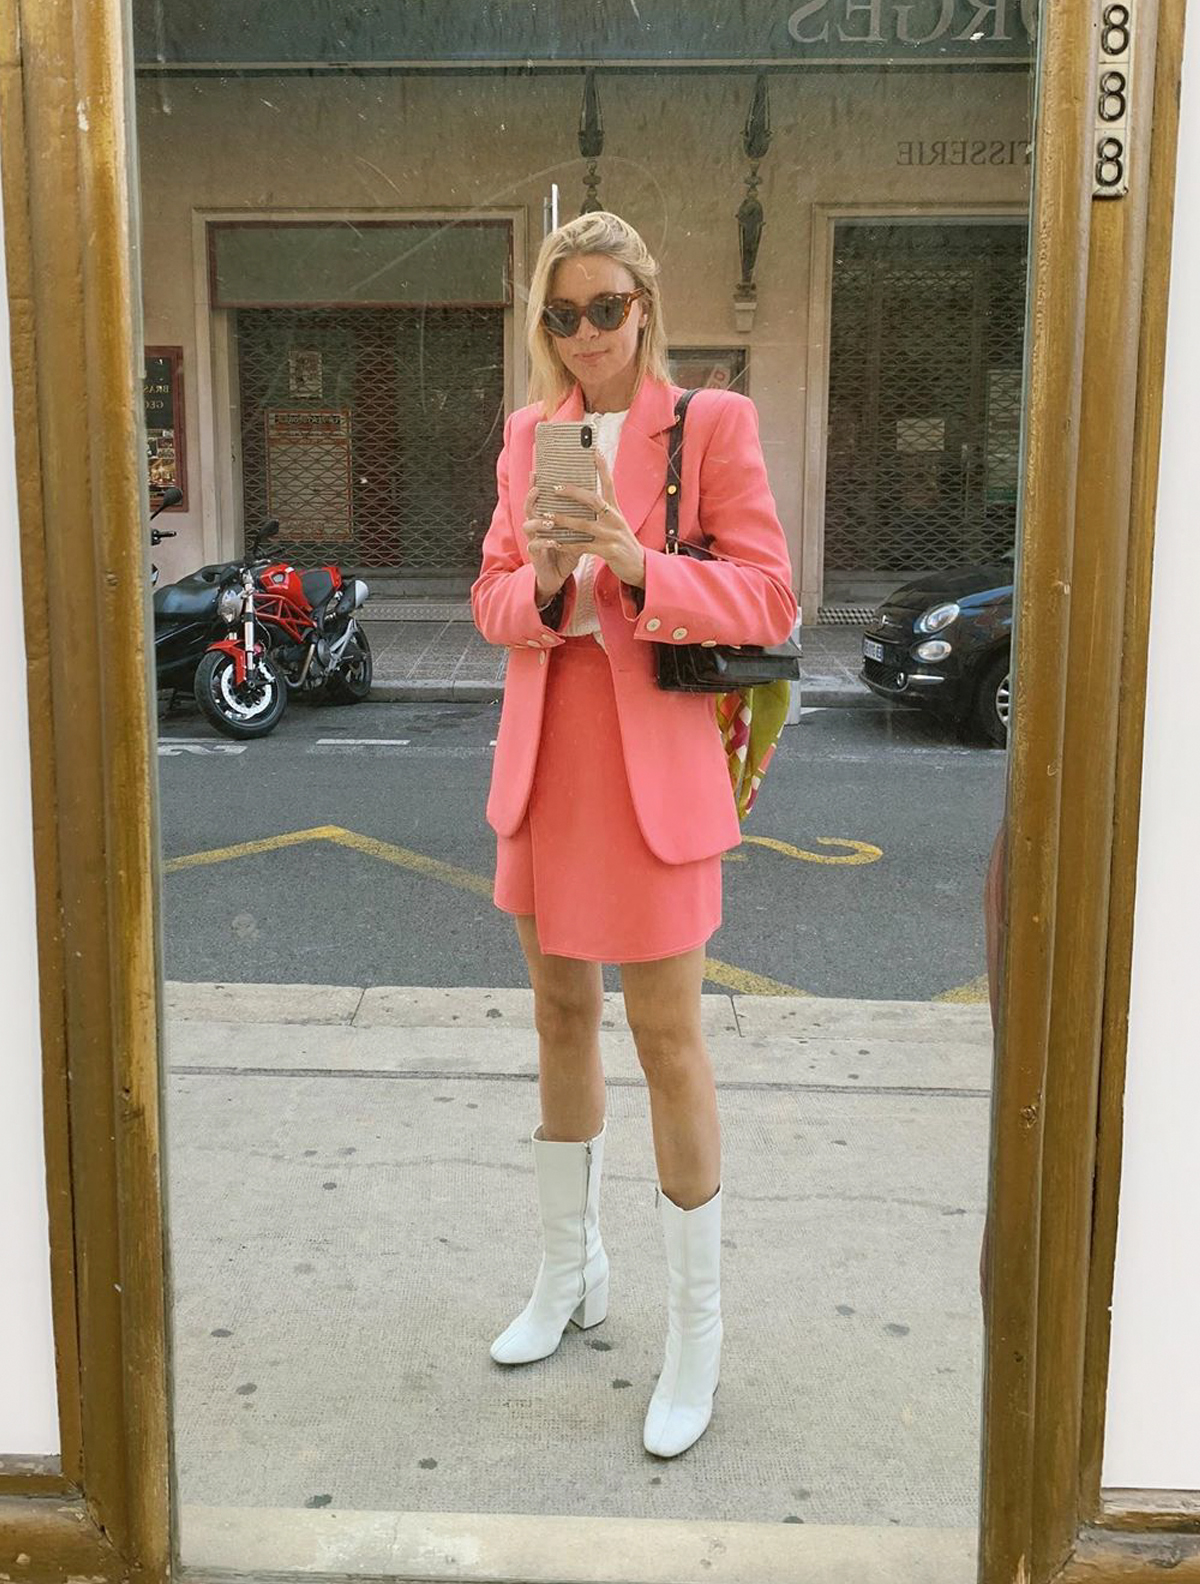 Best Autumn Boots 2019: Hanna Stegansson in a pair of white boots